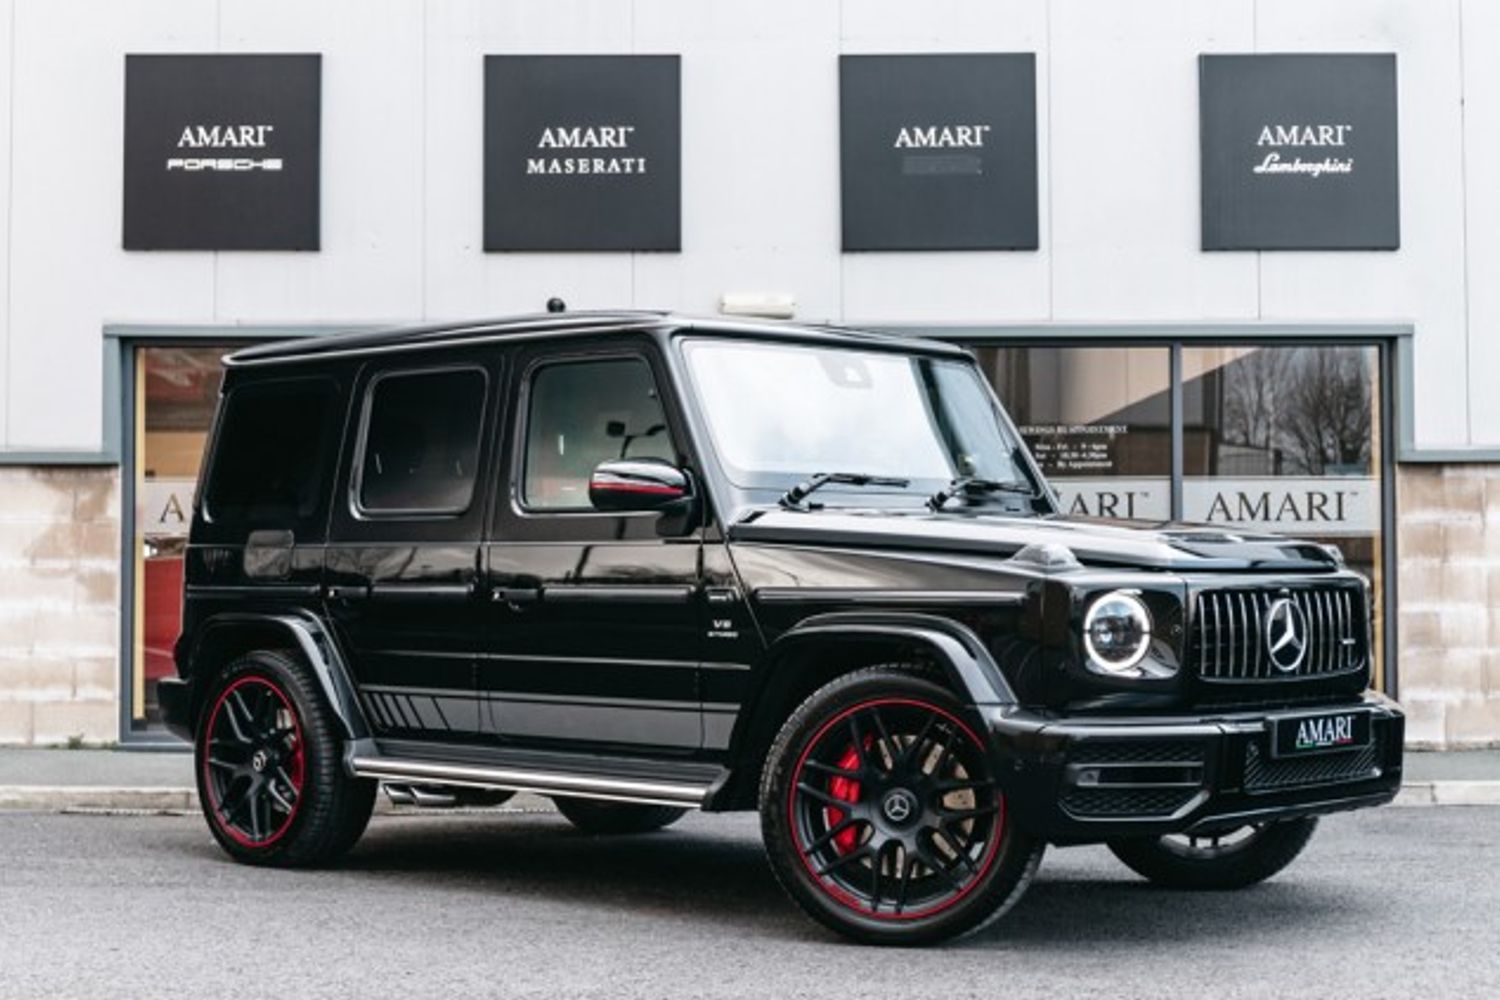 MERCEDES-BENZ G-CLASS ESTATE 4.0 AMG G 63 4MATIC EDITION 1 5DR AUTOMATIC